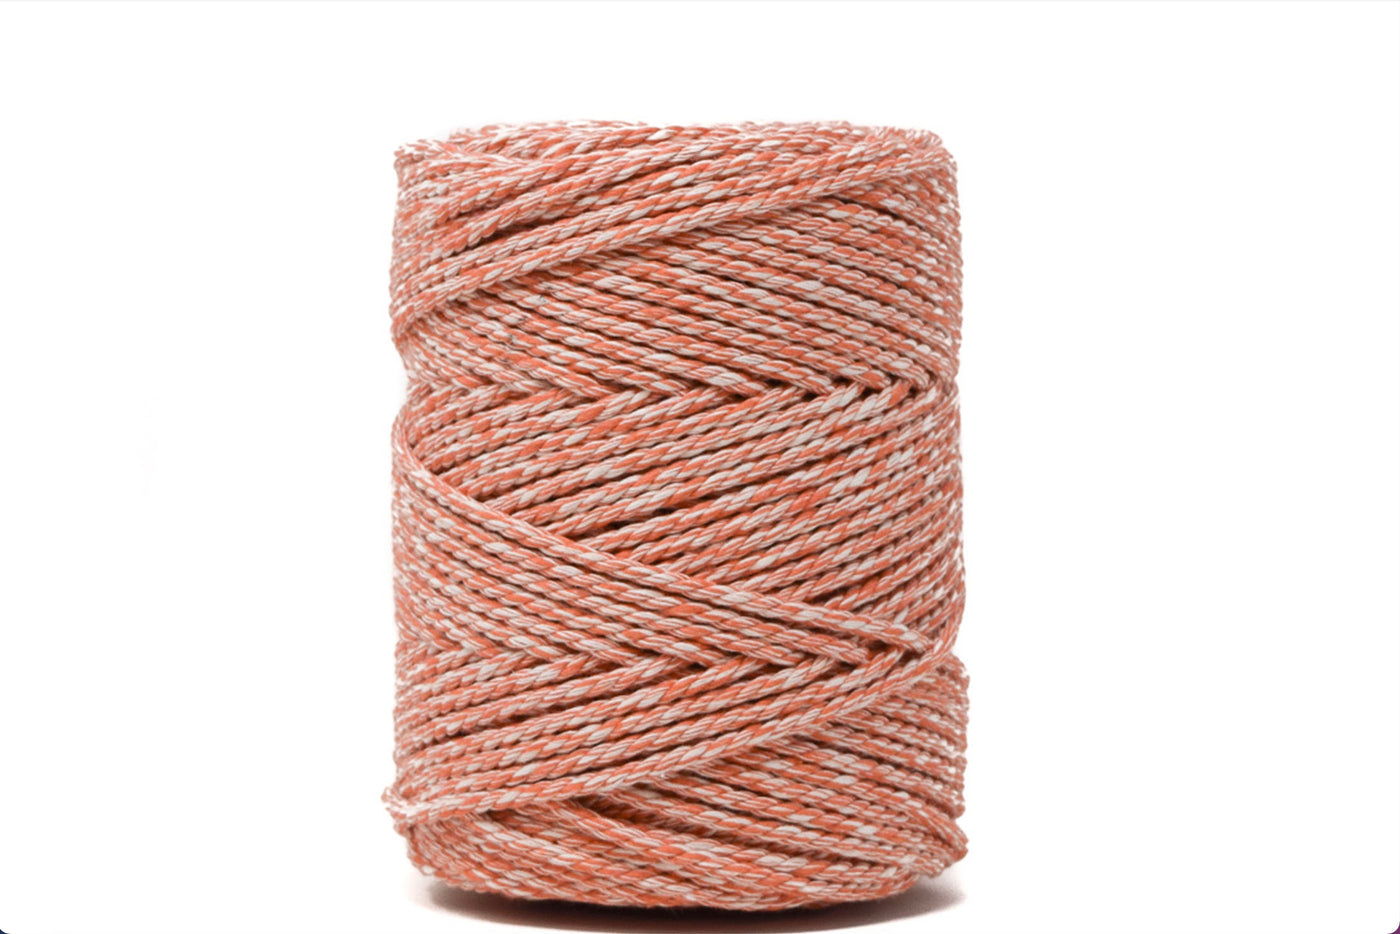 DUAL COTTON ROPE ZERO WASTE 3 MM - 3 PLY - GRAPEFRUIT + NATURAL COLOR